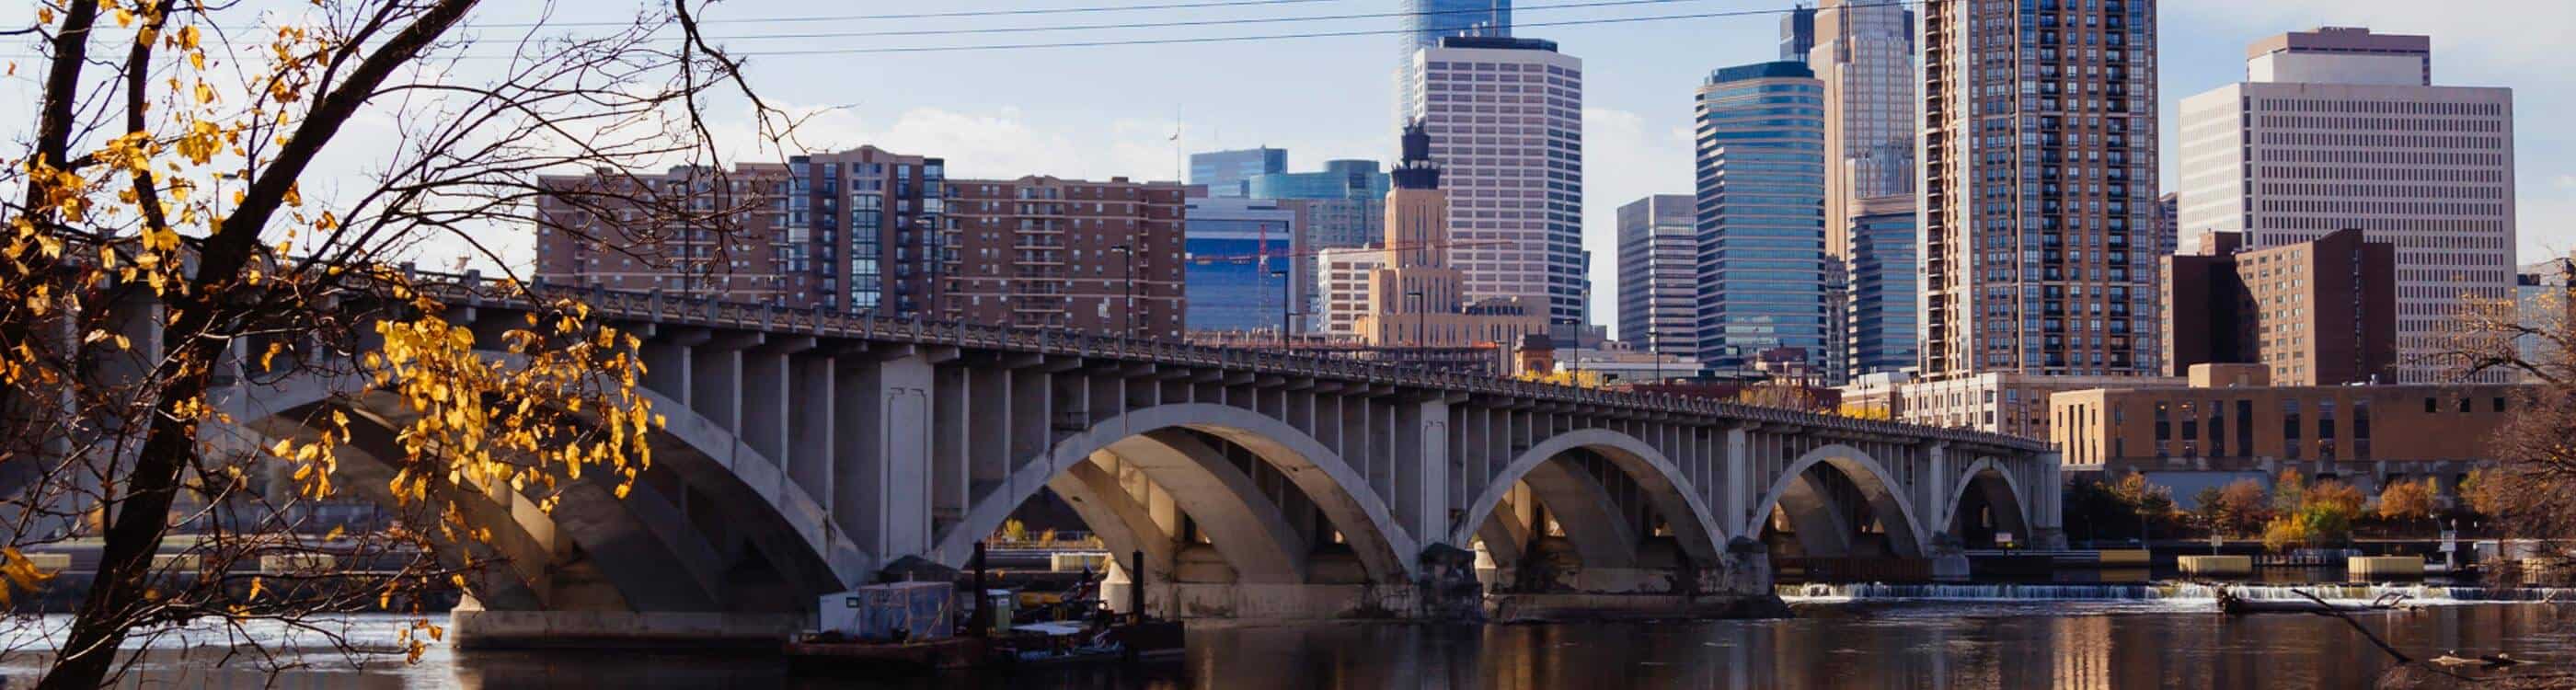 Cityscape of downtown Minneapolis across the river